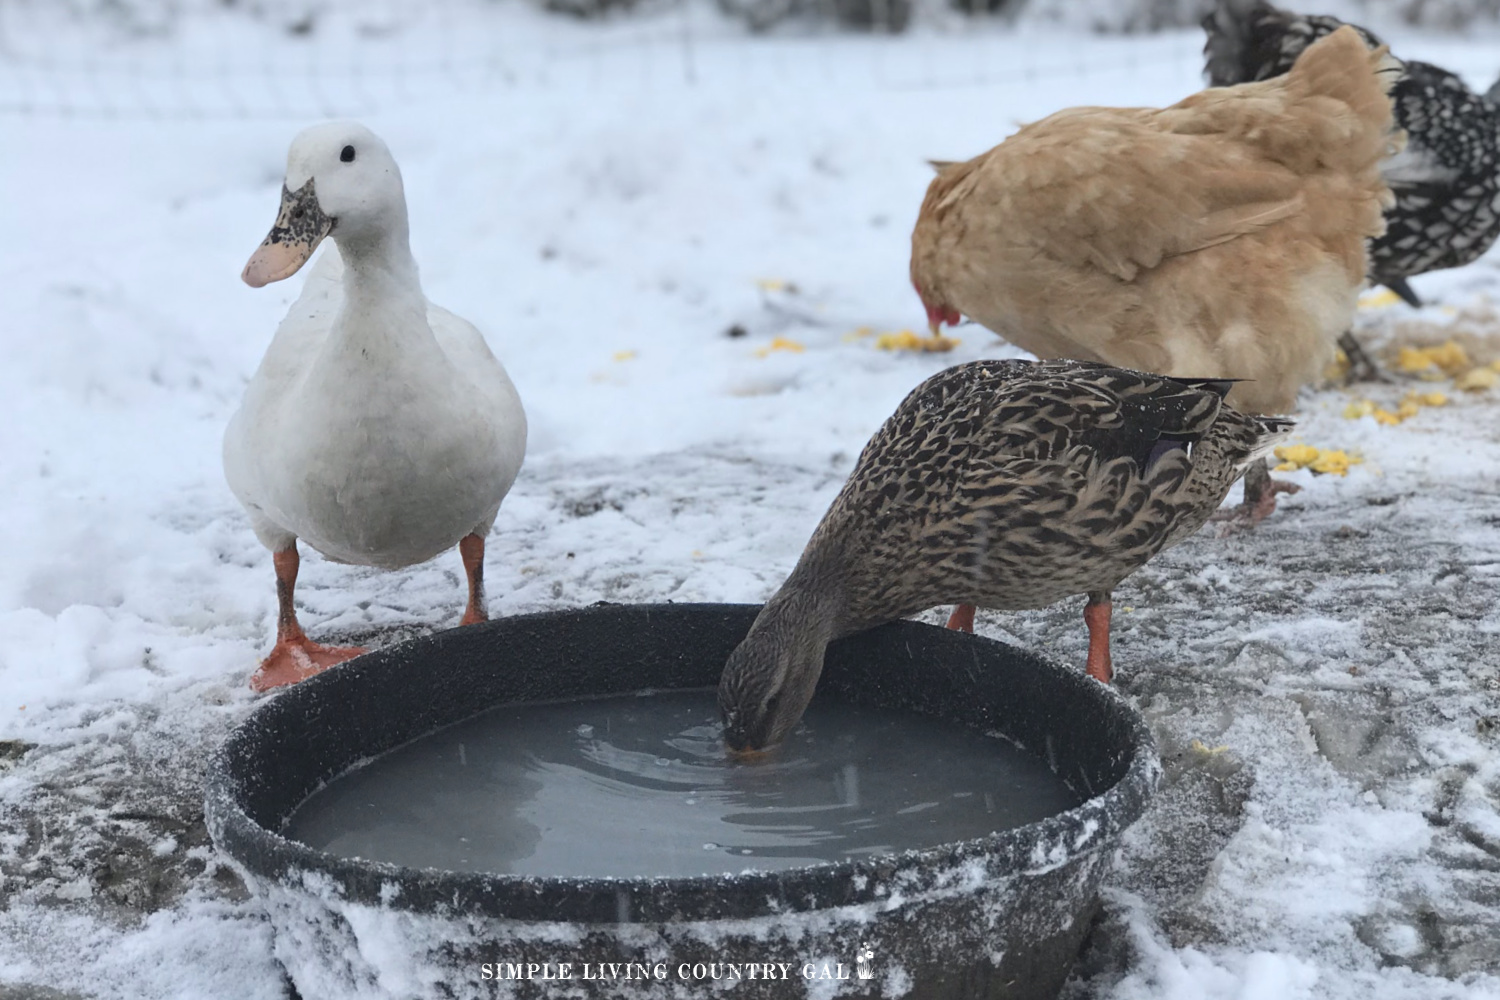 Ducks have to stay hydrated in the winter too! Here's some winter duck care tips to keep your ducks hydrated and healthy